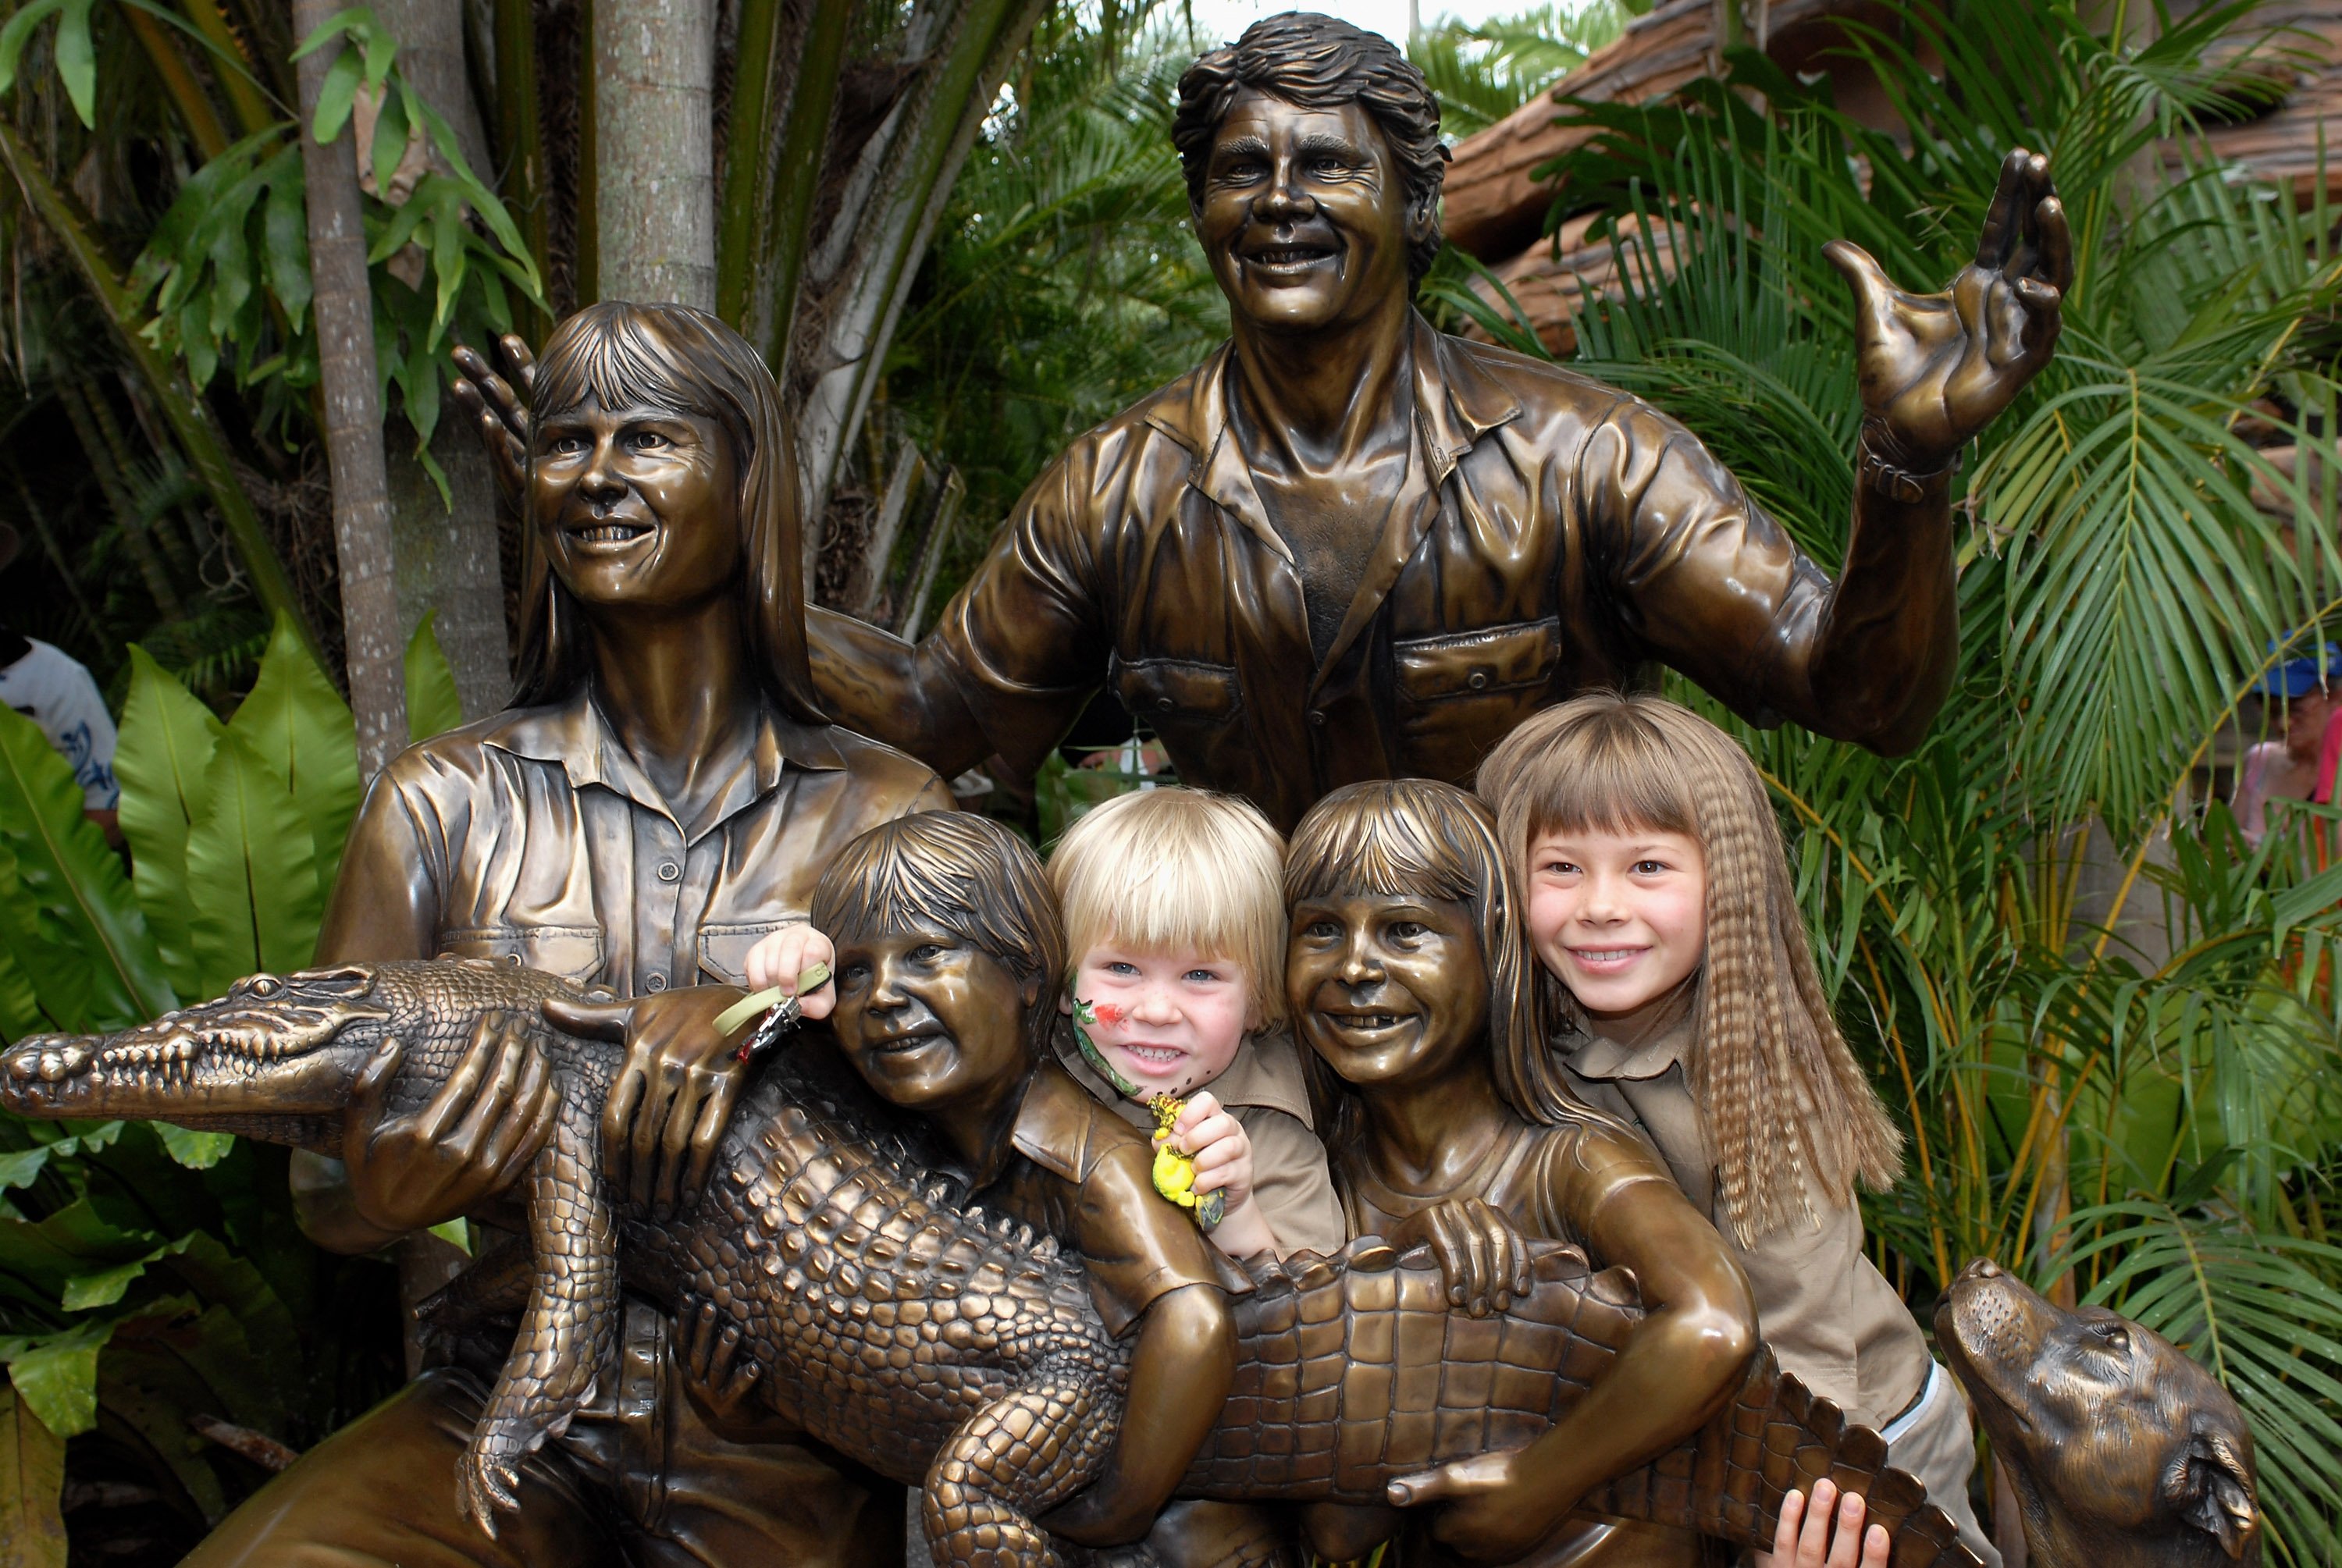 Unveiling the memorial family statue Robert Irwin and Bindi Irwin attend "Steve Irwin Memorial Day" at Australia Zoo on November 15, 2007 on the Sunshine Coast, Australia | Source: Getty Images 